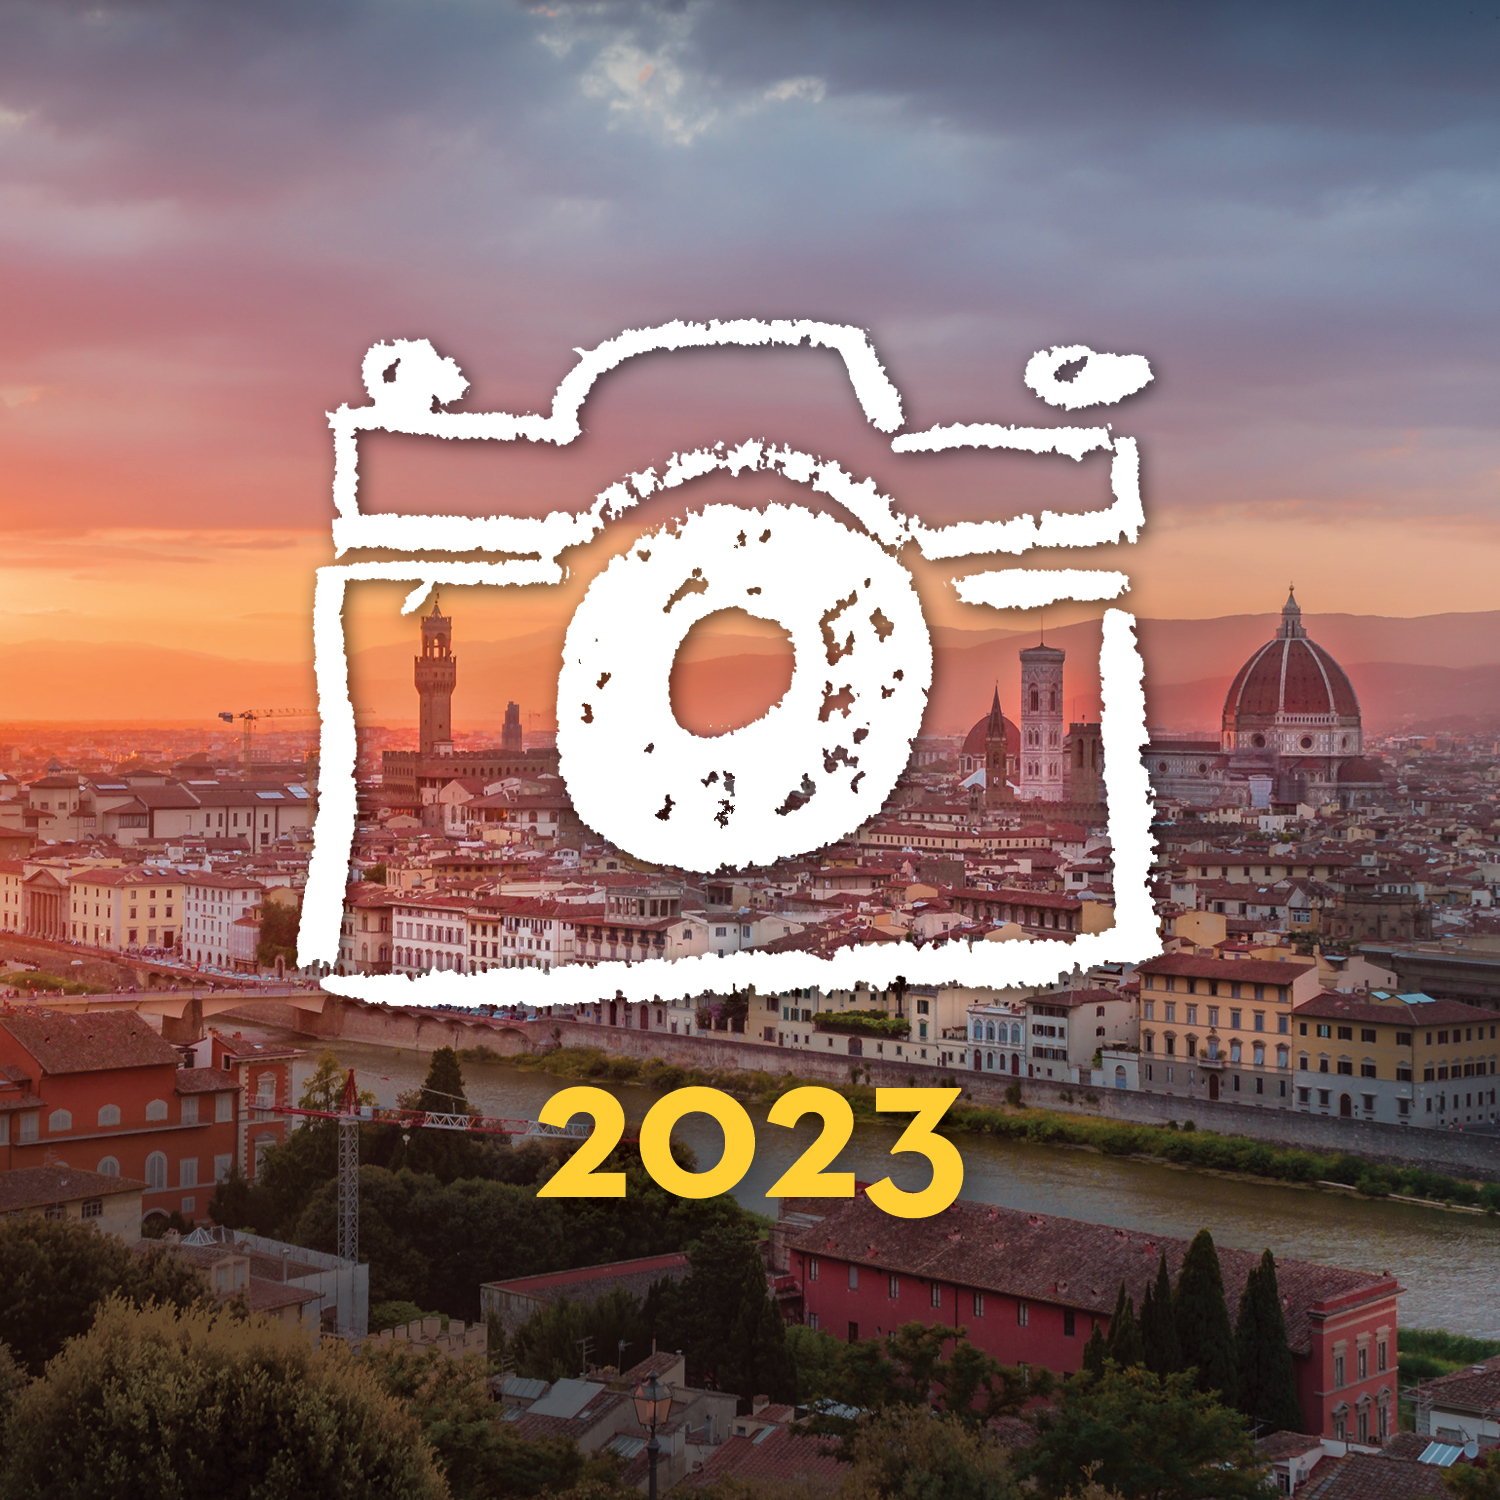 View of Florence, Italy at sunset with an overlayed illustration of a camera. 2023